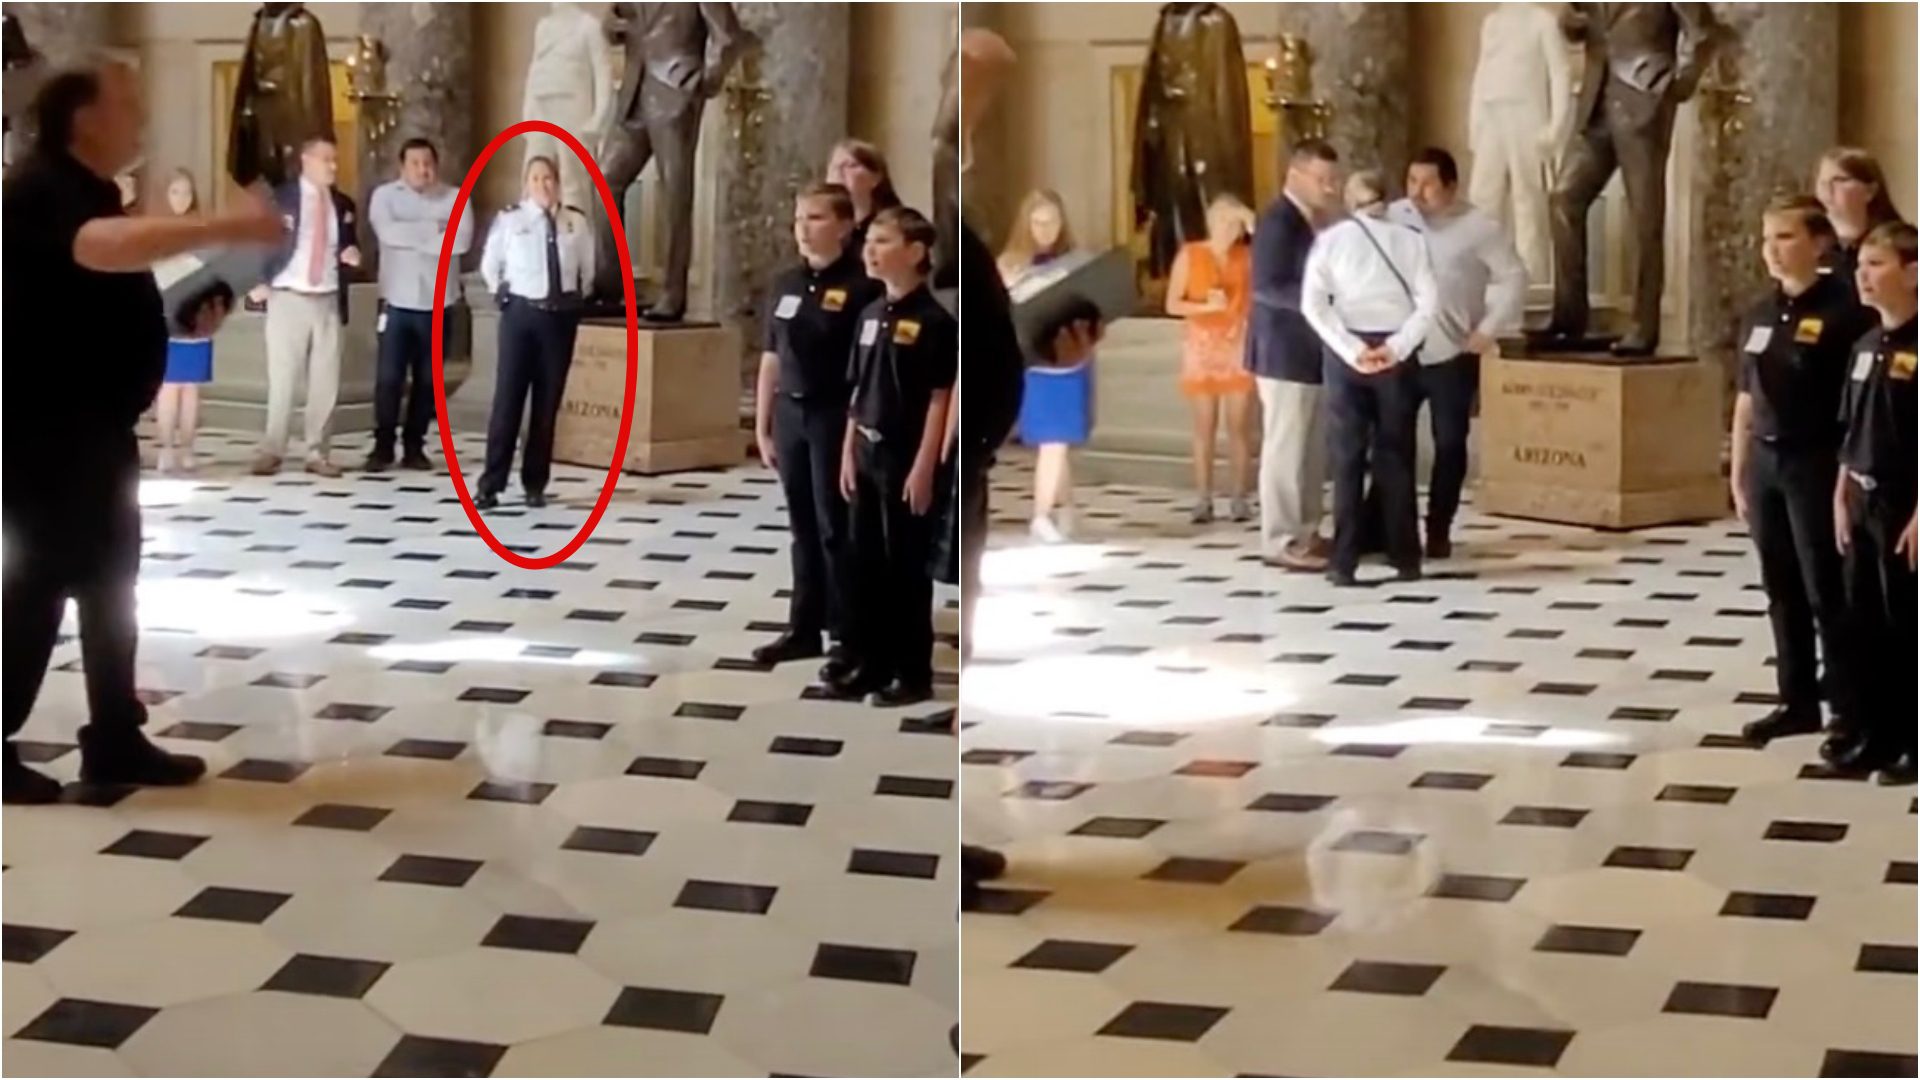 Breaking News: Choir Director Confronts US Capitol Police - So, Children Are Forbidden To Sing National Anthem In Their Own Capitol? - Officer Confirms